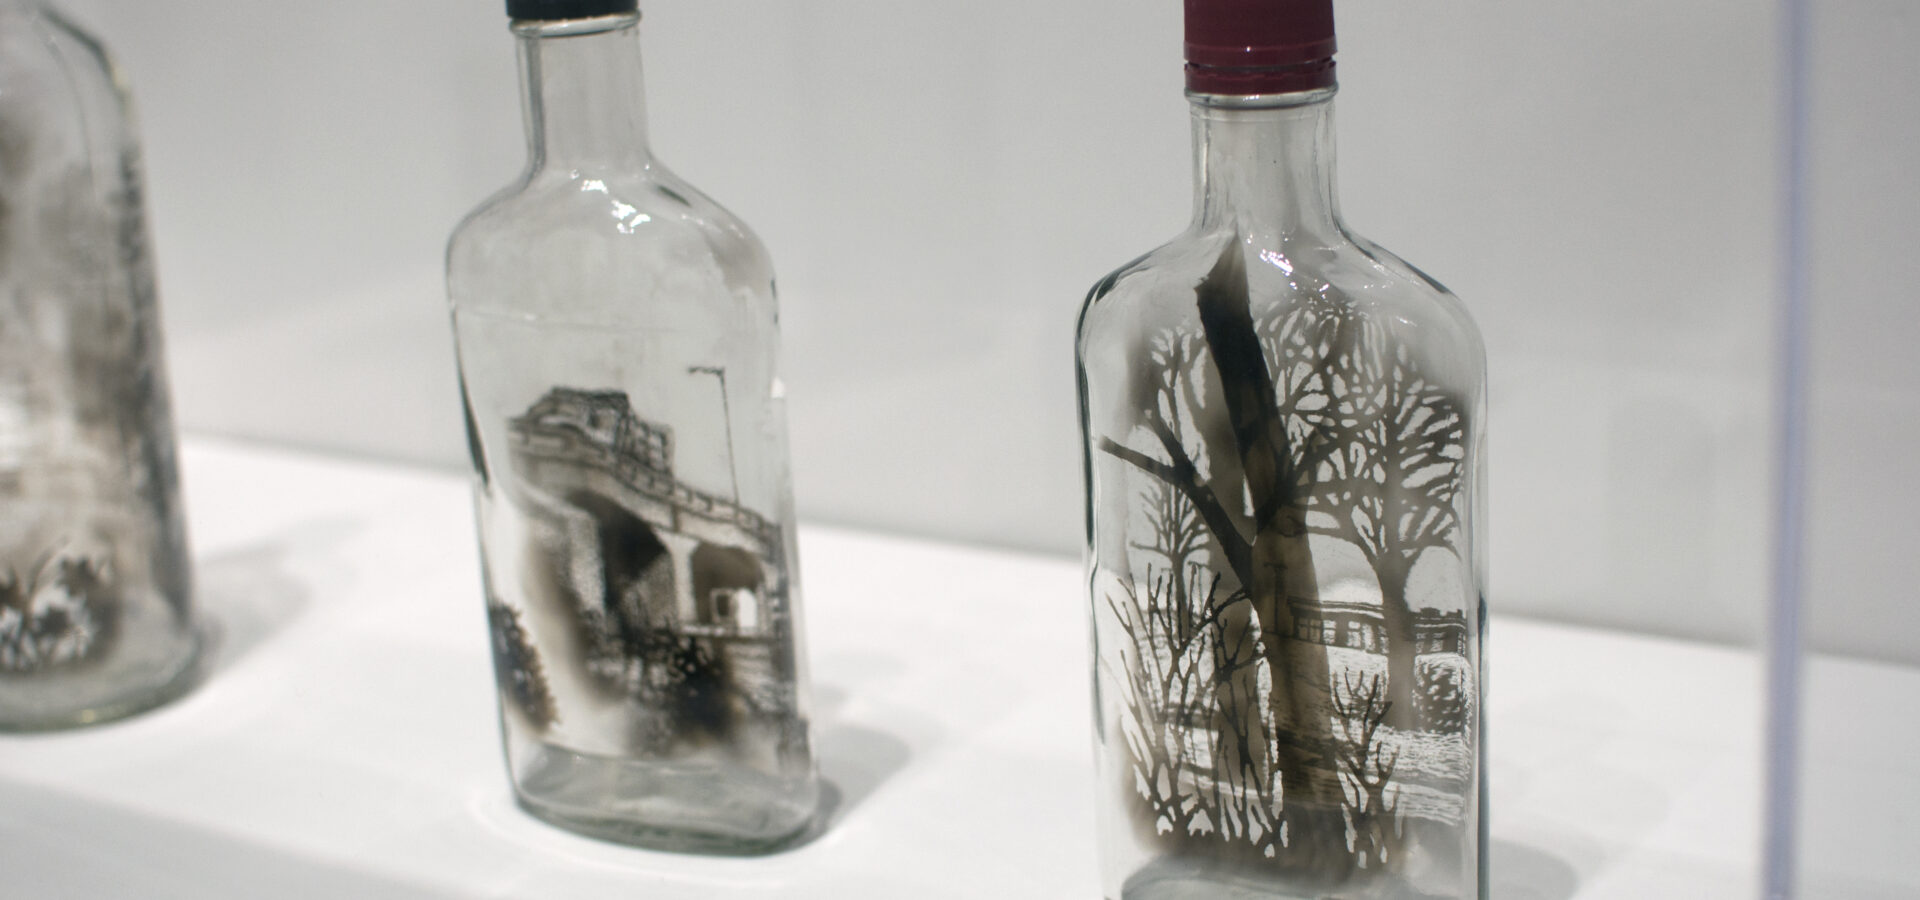 Glass bottles with pieces of wood inside resembling little trees.